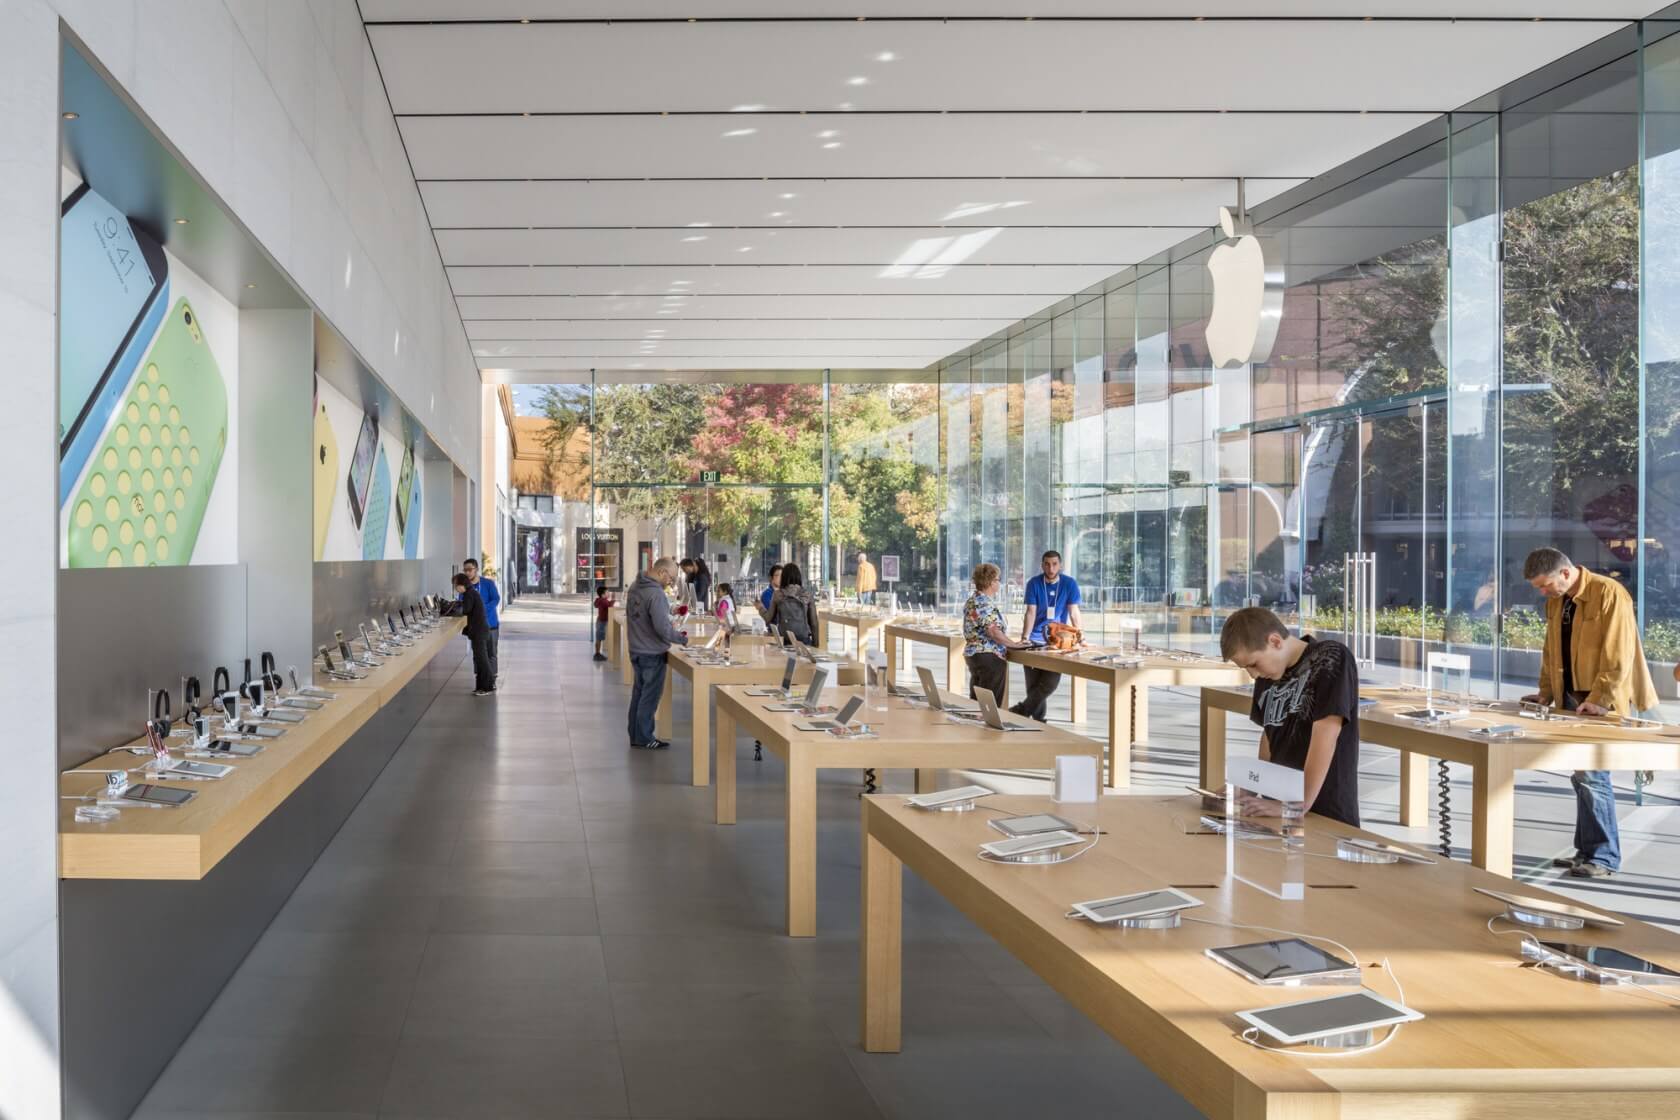 Apple is experiencing iPhone replacement shortages due to coronavirus disruption